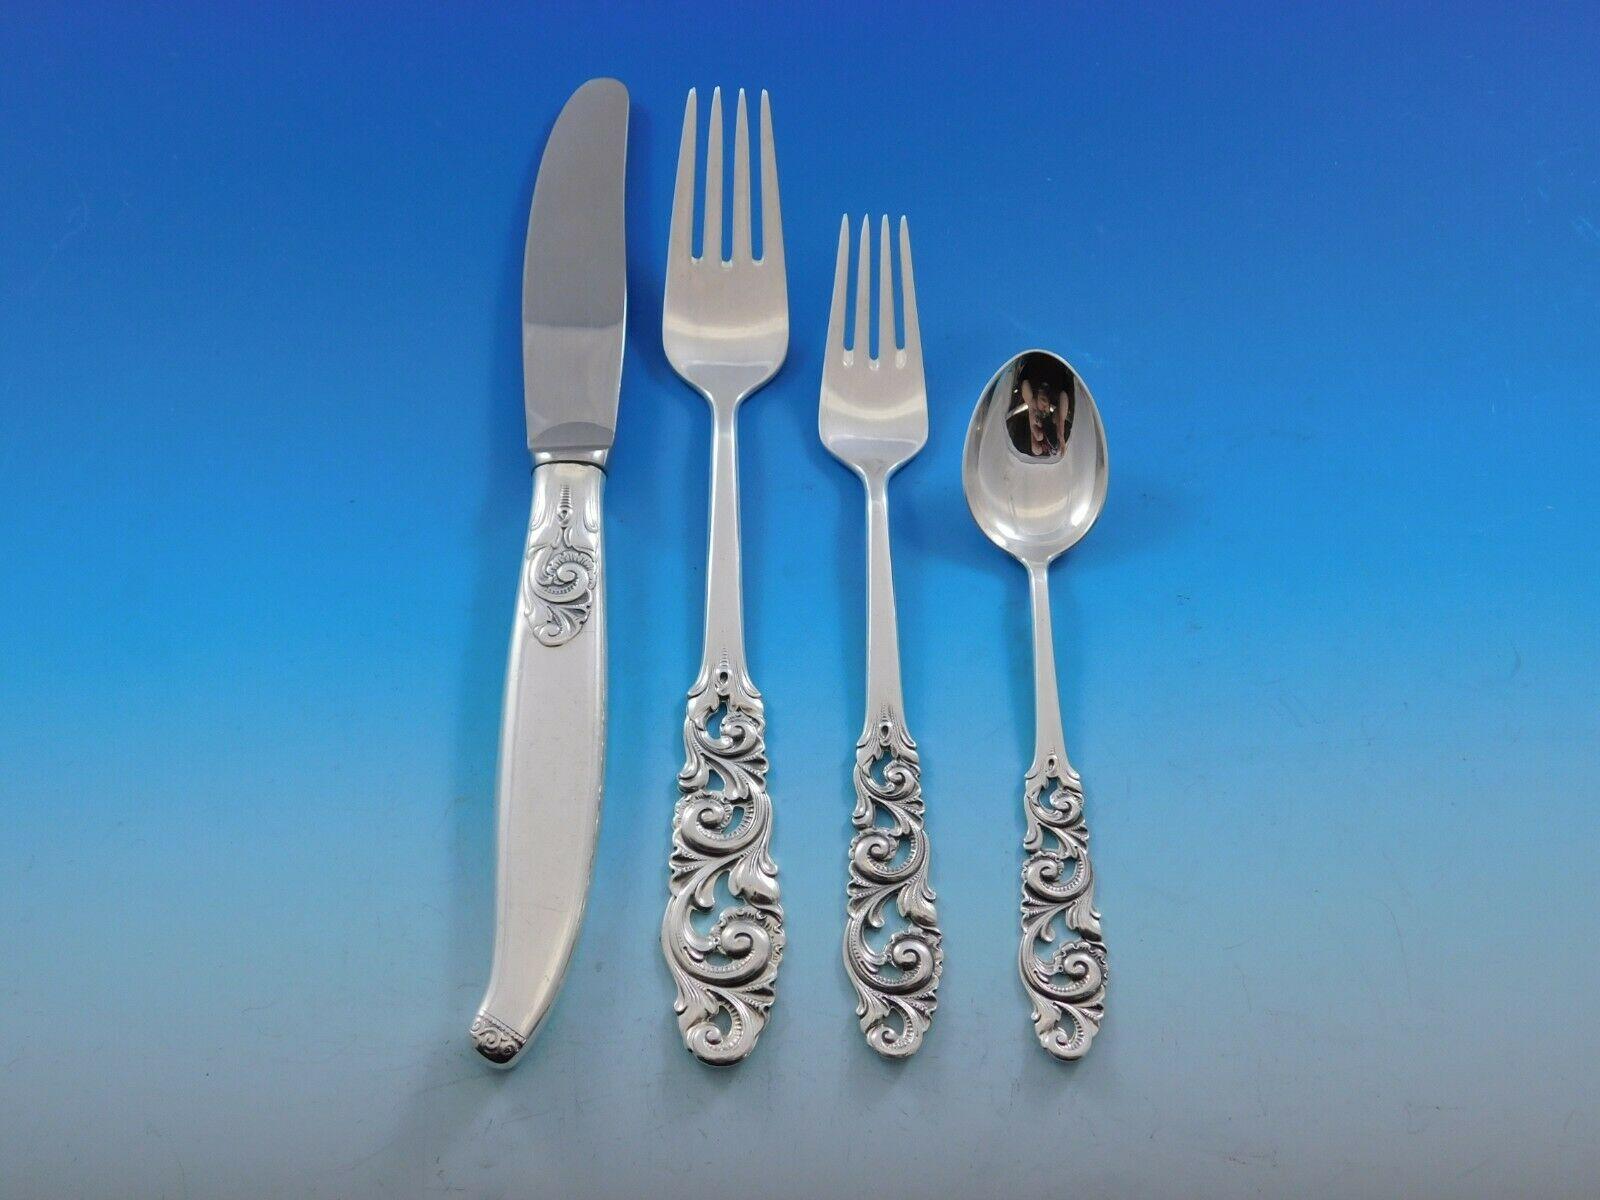 Scarce Tele by Mylius Brodrene 830 silver Norwegian flatware set, 40 pieces. This rare set features ornate pierced handles and includes:

8 knives, 8 1/4